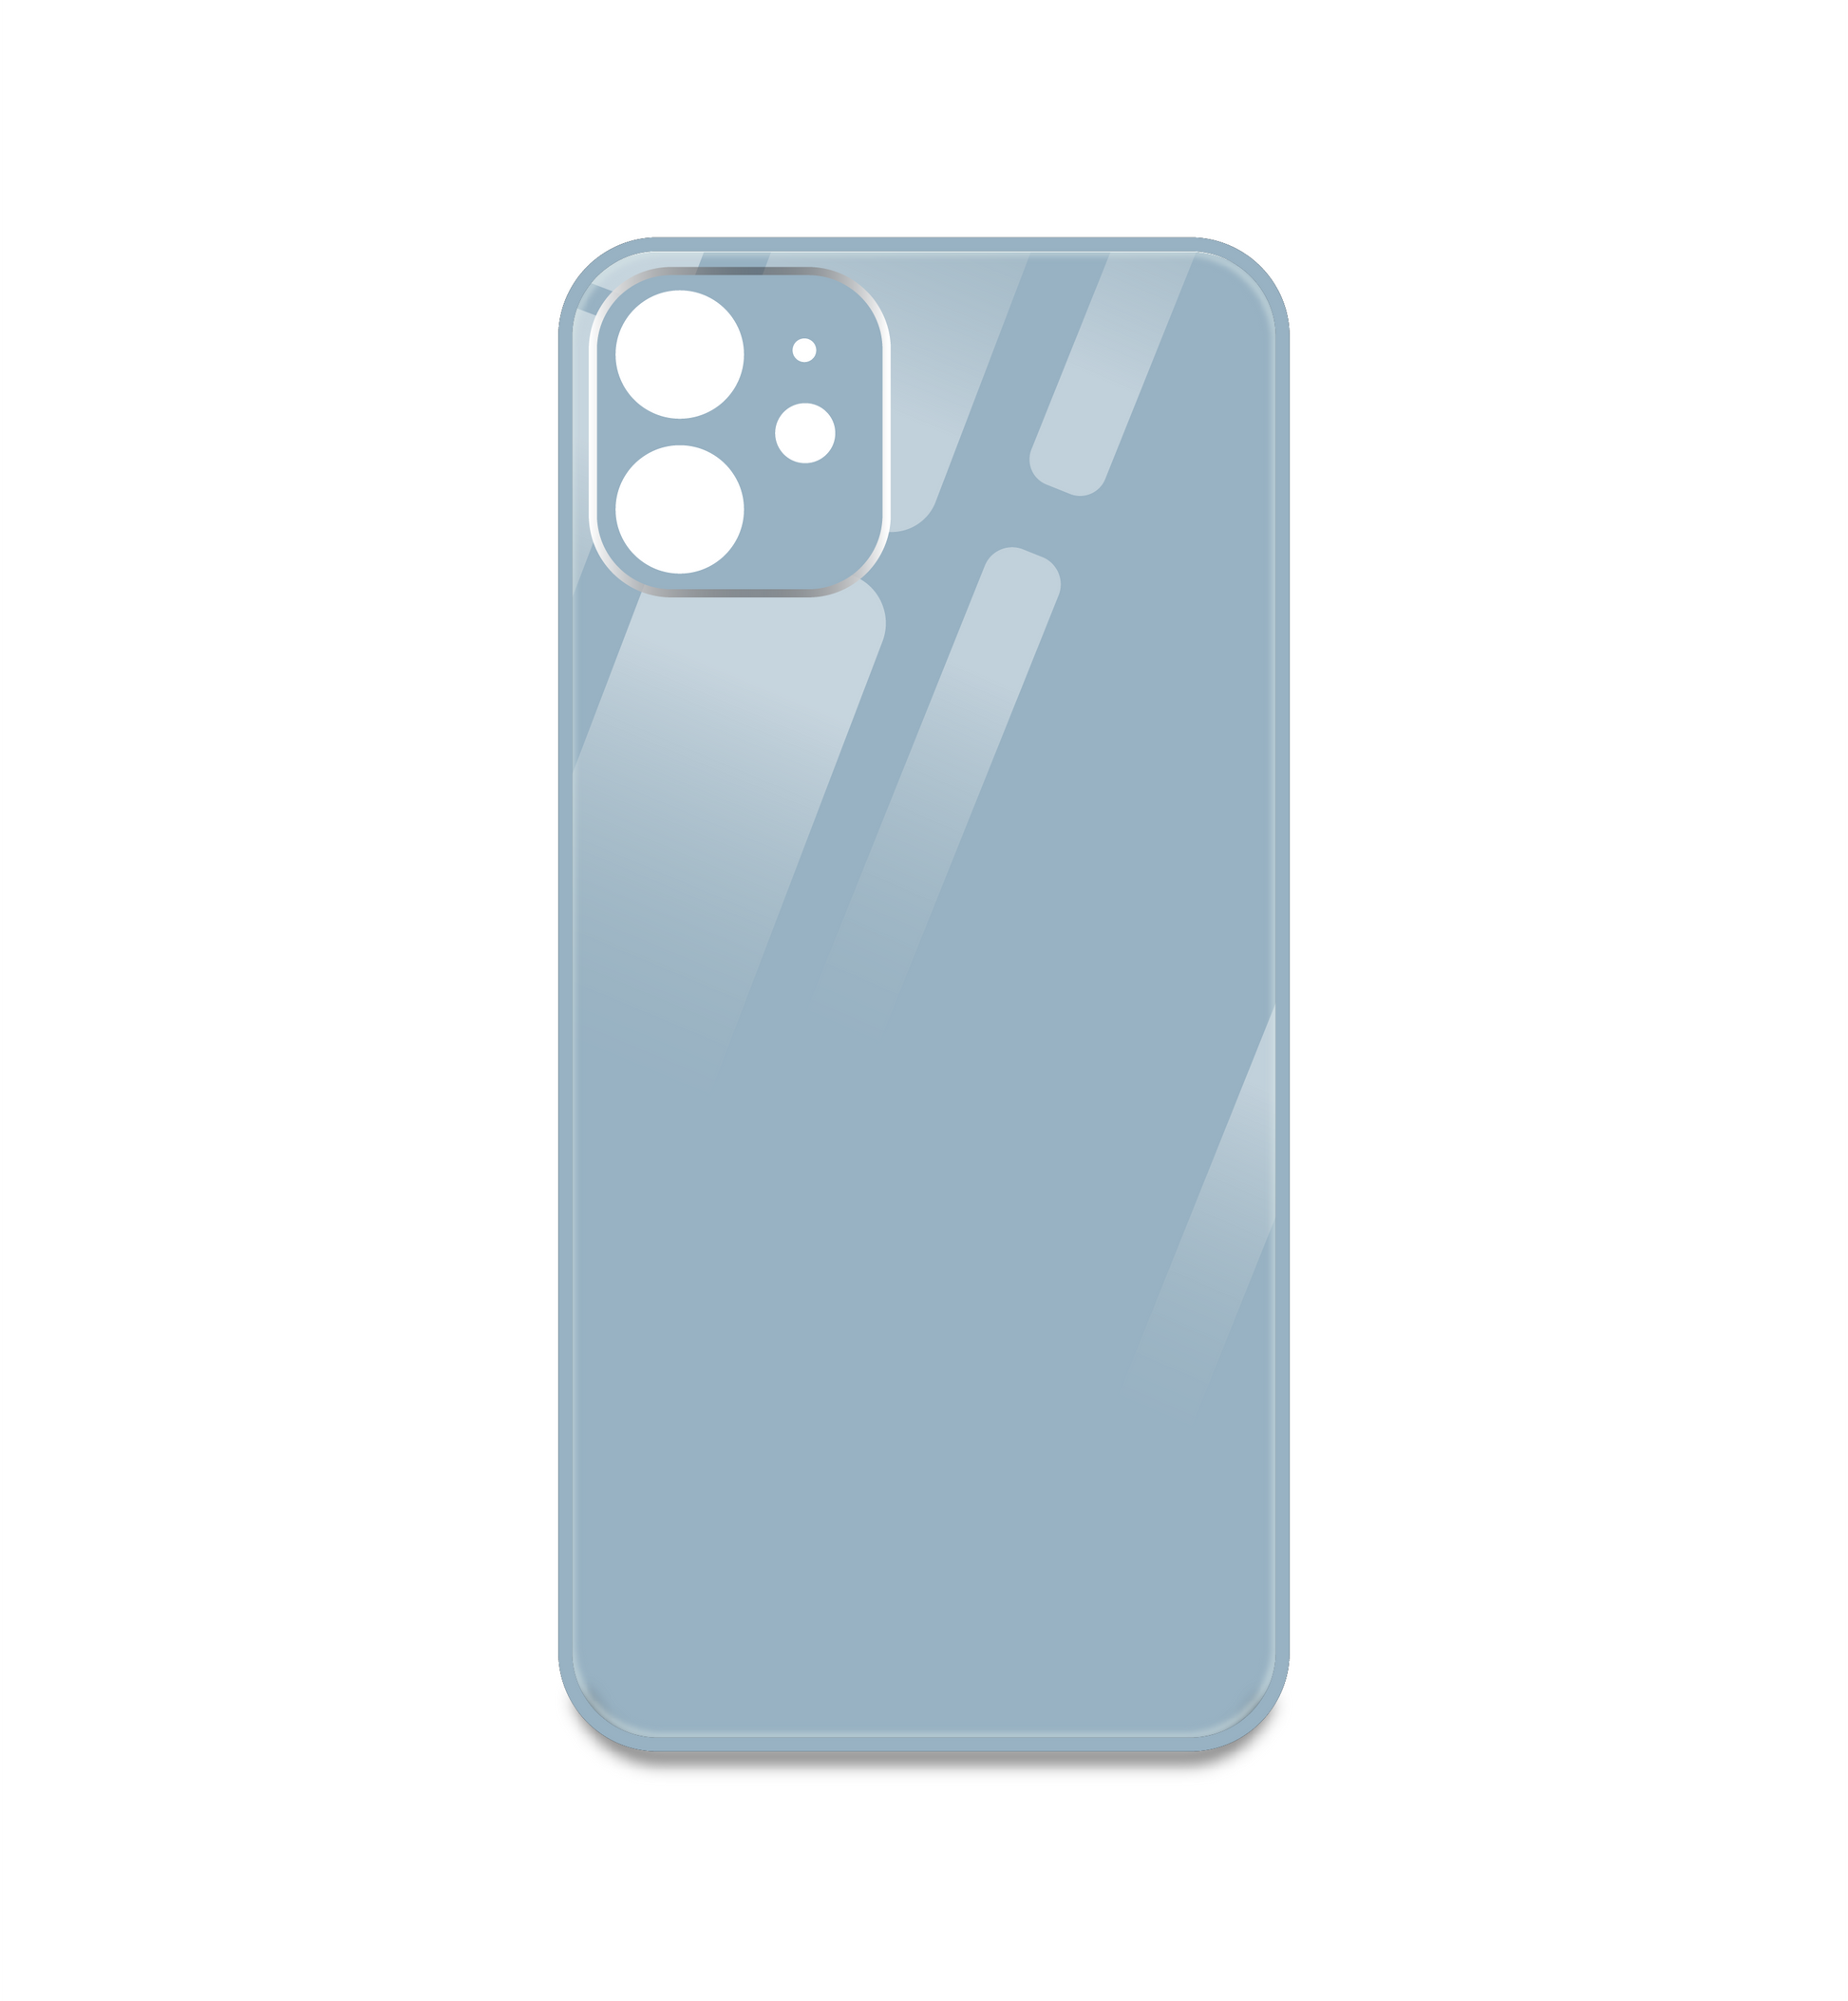 Pastel Blue - Glass Silicone Case For Apple iPhone Models